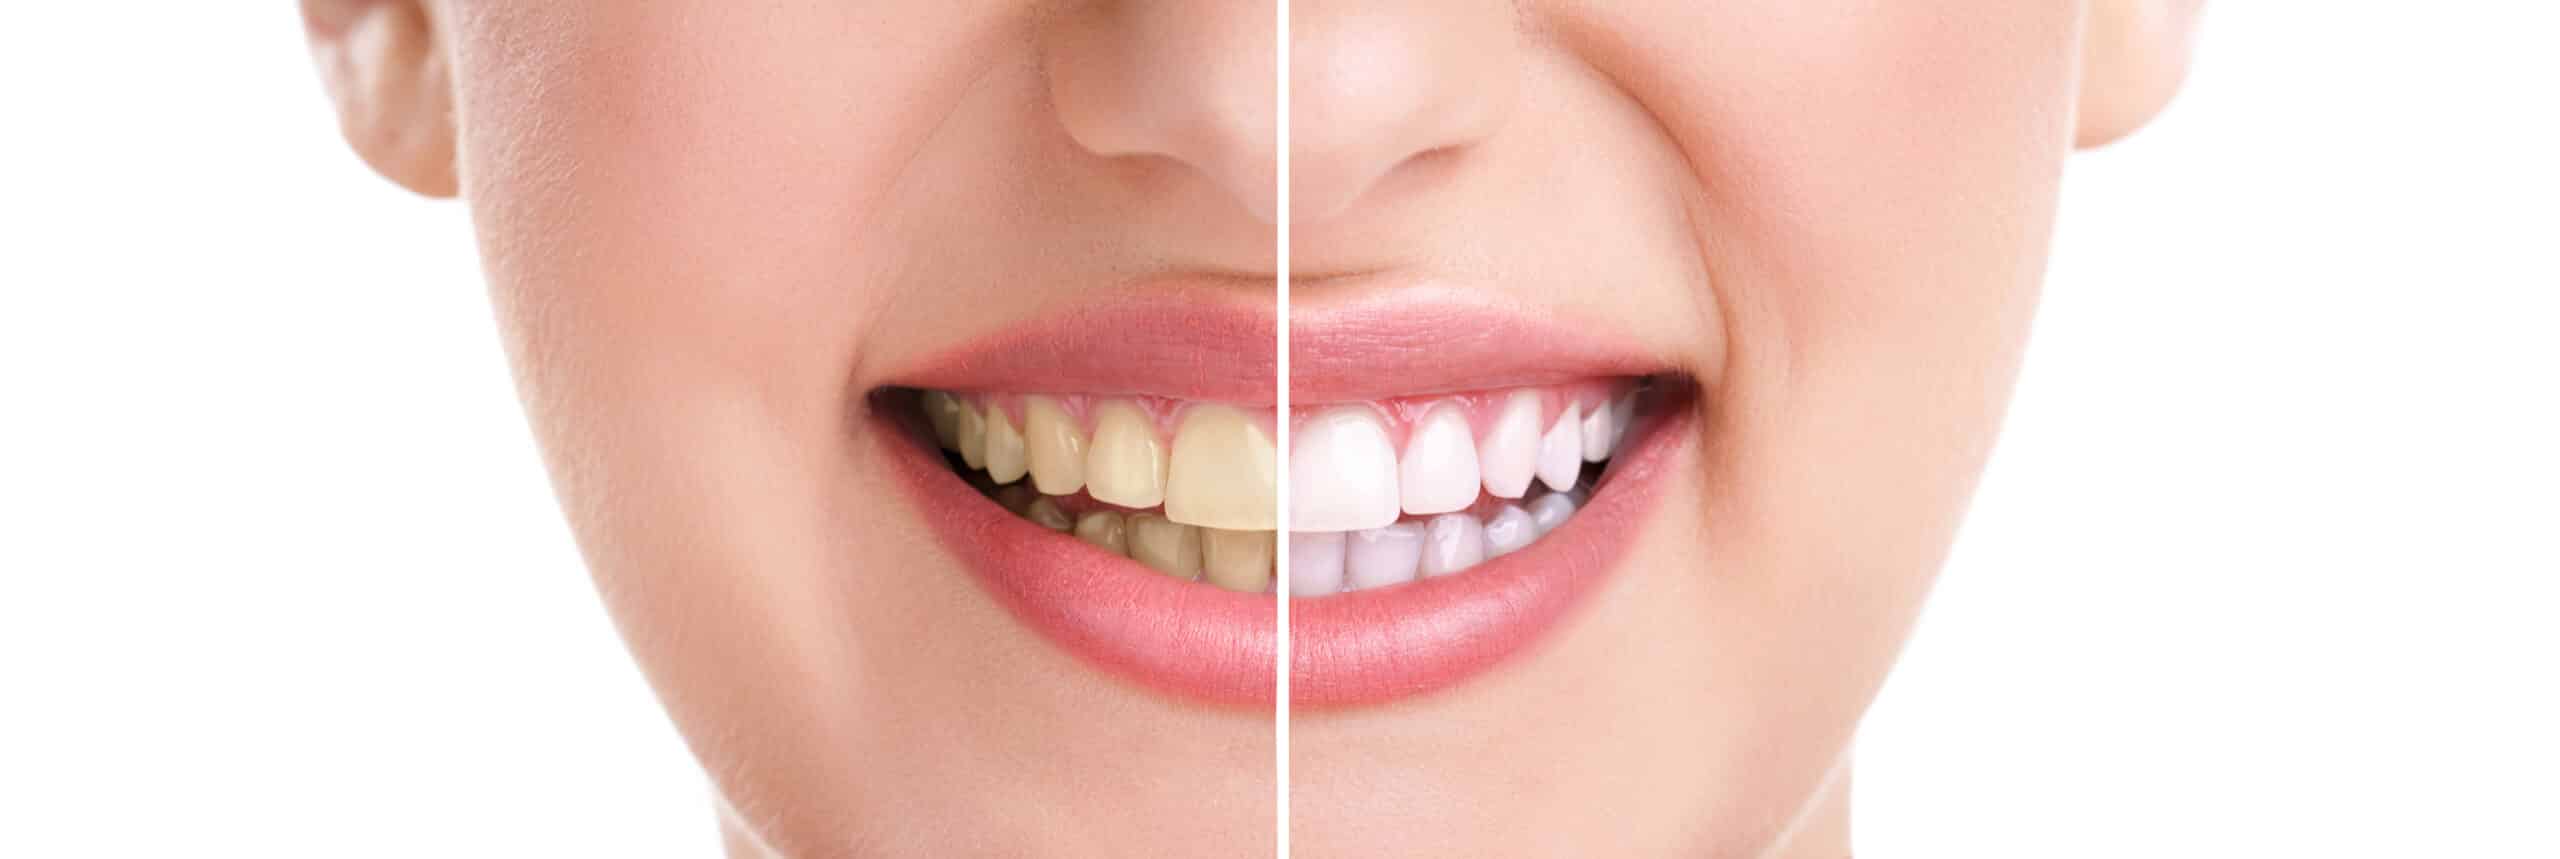 Are Teeth Naturally Yellow or White?